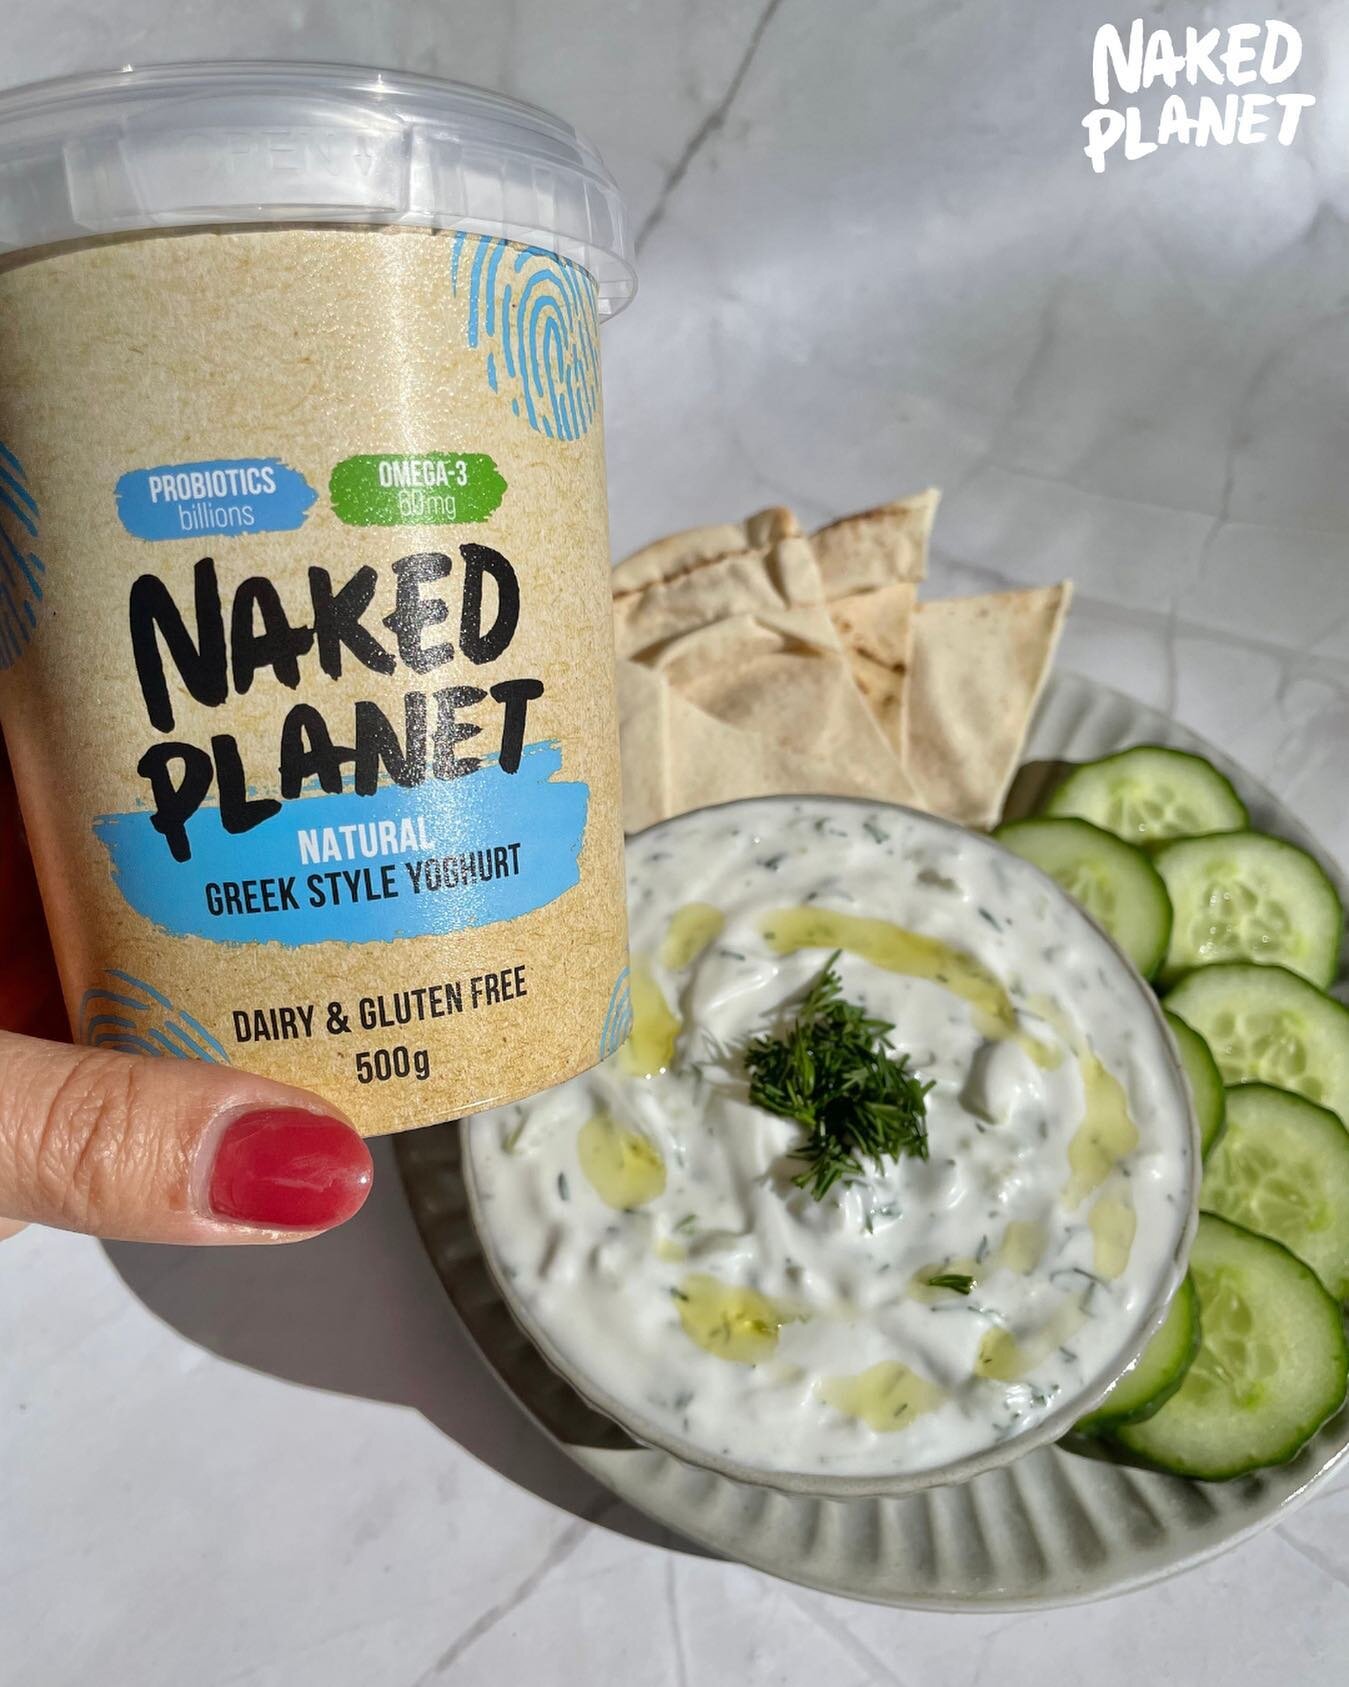 The only way to make Tzatziki is by&hellip; getting Naked of course!! 😜Our Natural Greek Style Yoghurt will give you the creamiest and thickest Tzatziki 🤤

Method:
🌱Grate 1/2 cucumber and drain/gently squeeze to remove liquid 
🌱Combine 1 1/2 cups